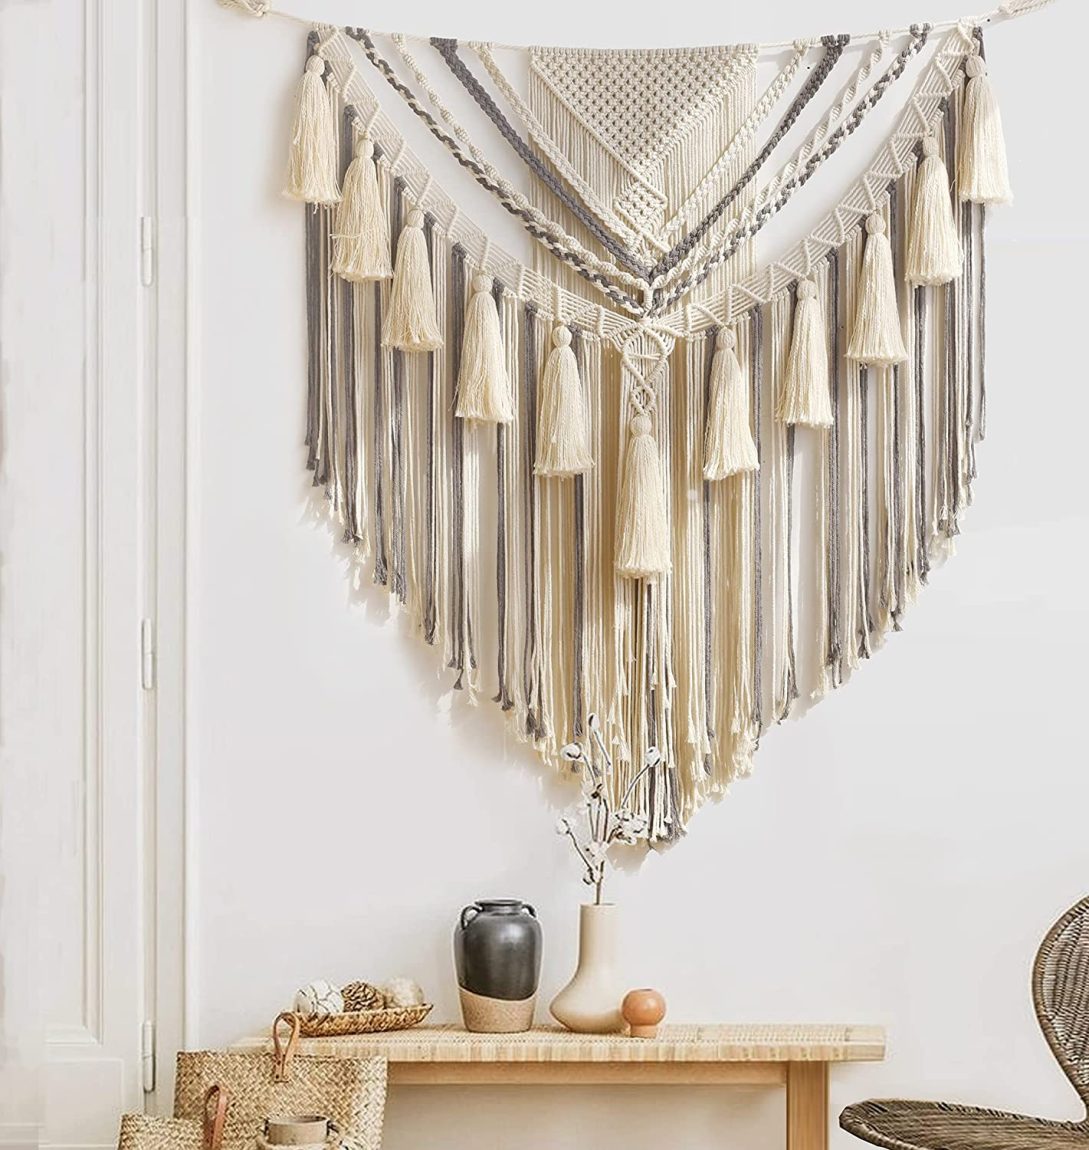 Macrame Wall Decor Layered Panel with Tassels - Where to Buy Large Macrame Hanging Wall Decor - Macrame hanging | Macrame planter | Macrame curtains | Macrame ideas | Macrame decor | Macrame circle | Macrame hanger | Hanging macrame | Textile inspiration | Textile art | Textile love | Textile fabric | Textile design | Woven hanging | Textile fabric